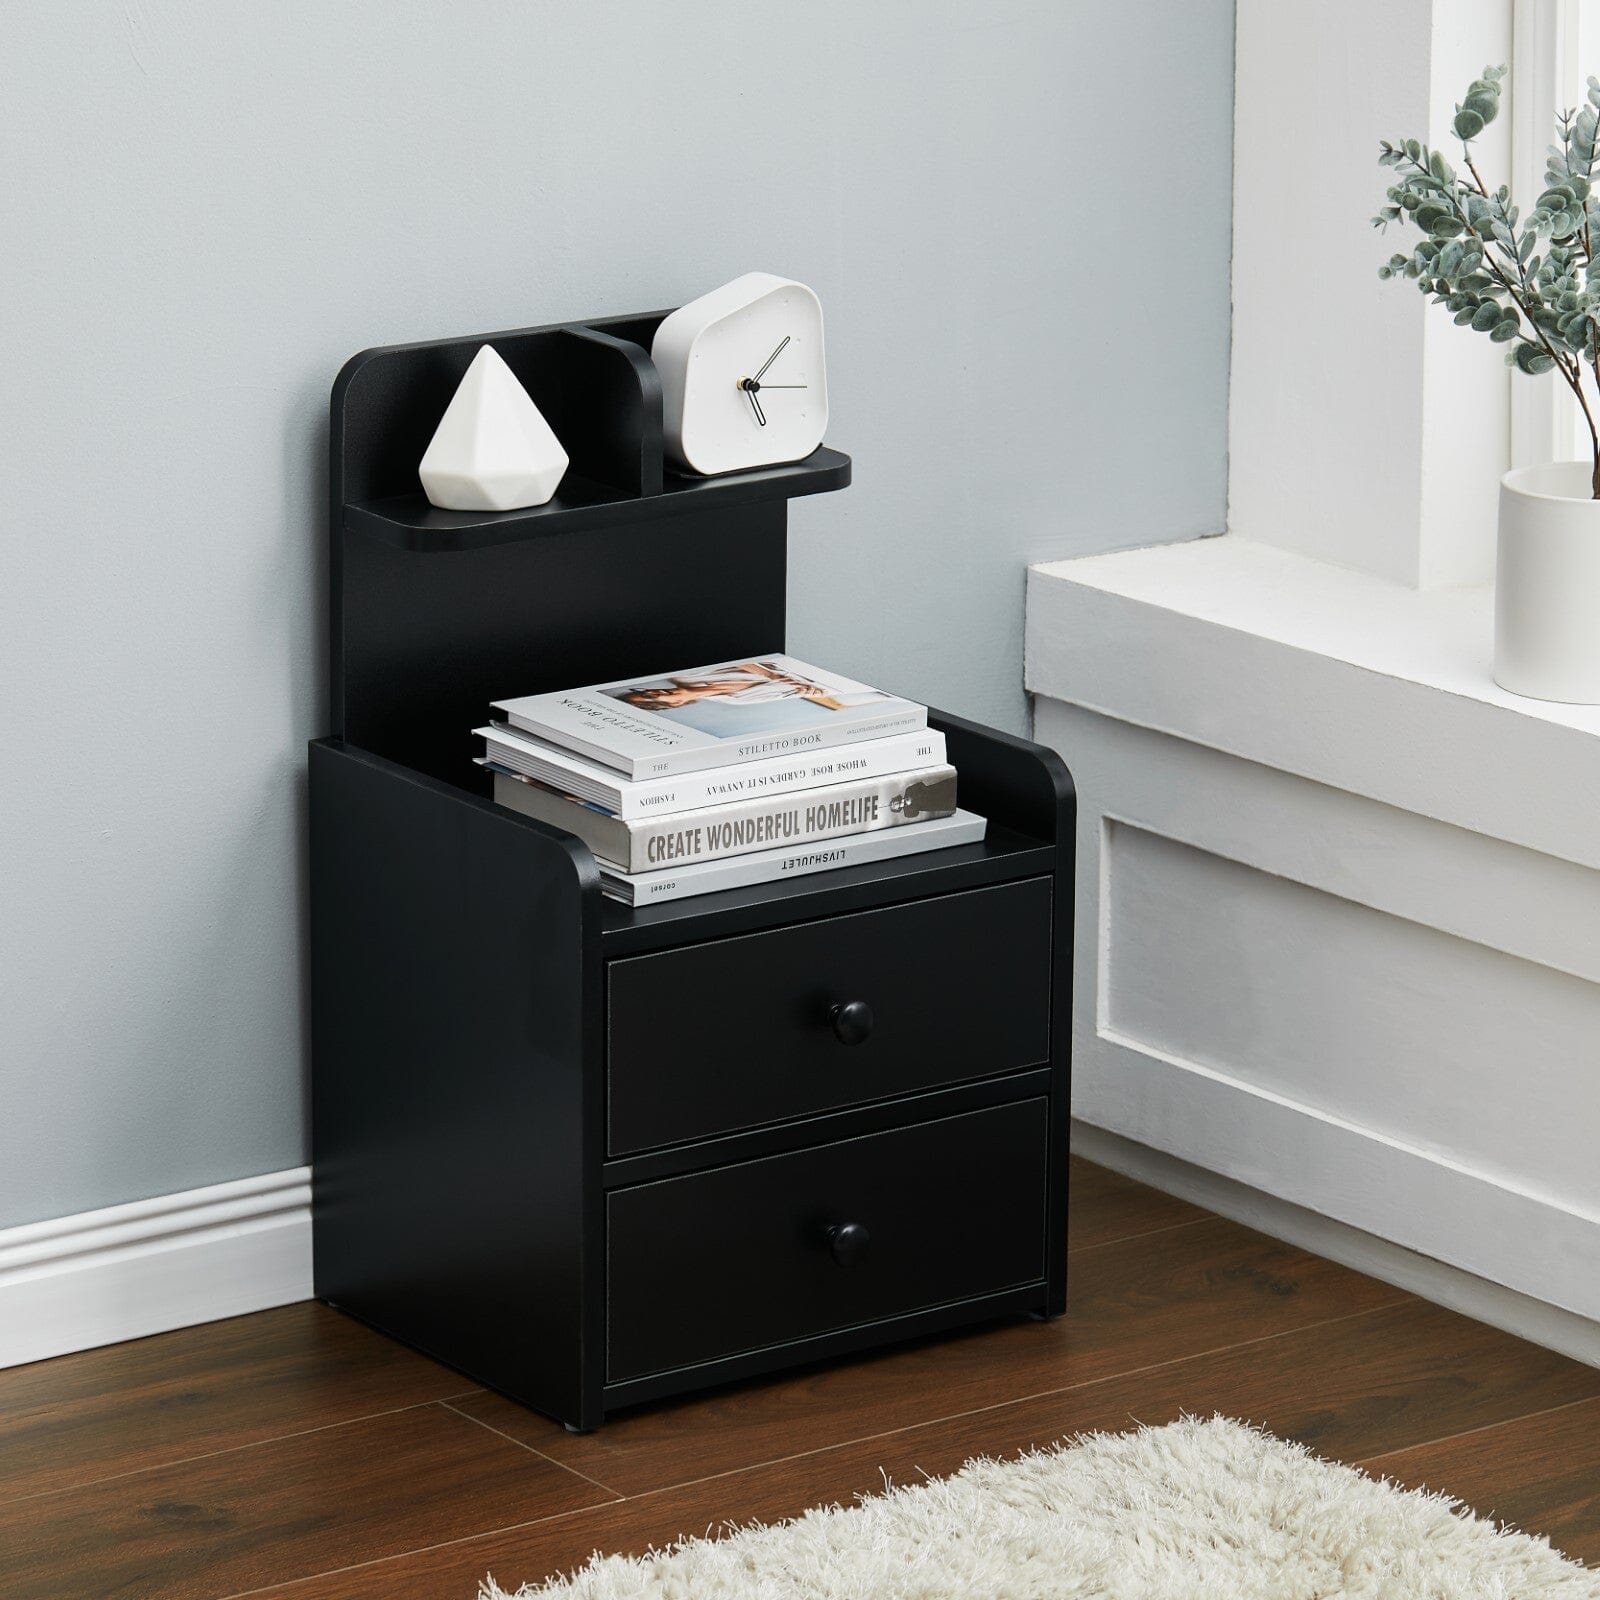 Minimalist Black Wooden Bedside Table with Drawers Cabinets Living and Home 2 Drawers 